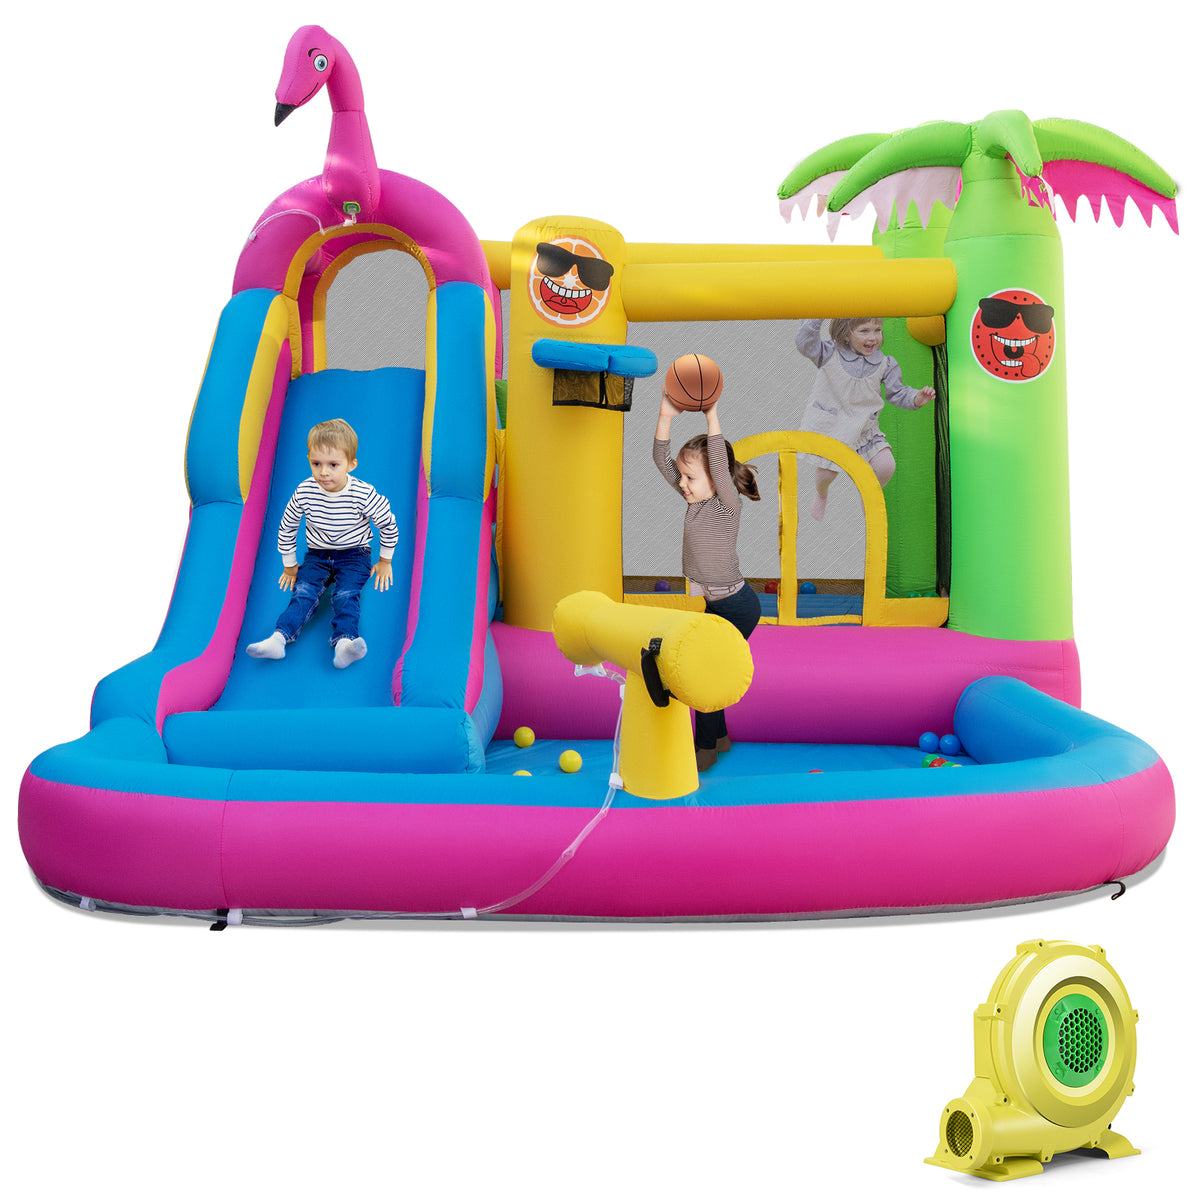 Hikidspace Inflatable Bounce Castle Long Water Slide with 735W Blower